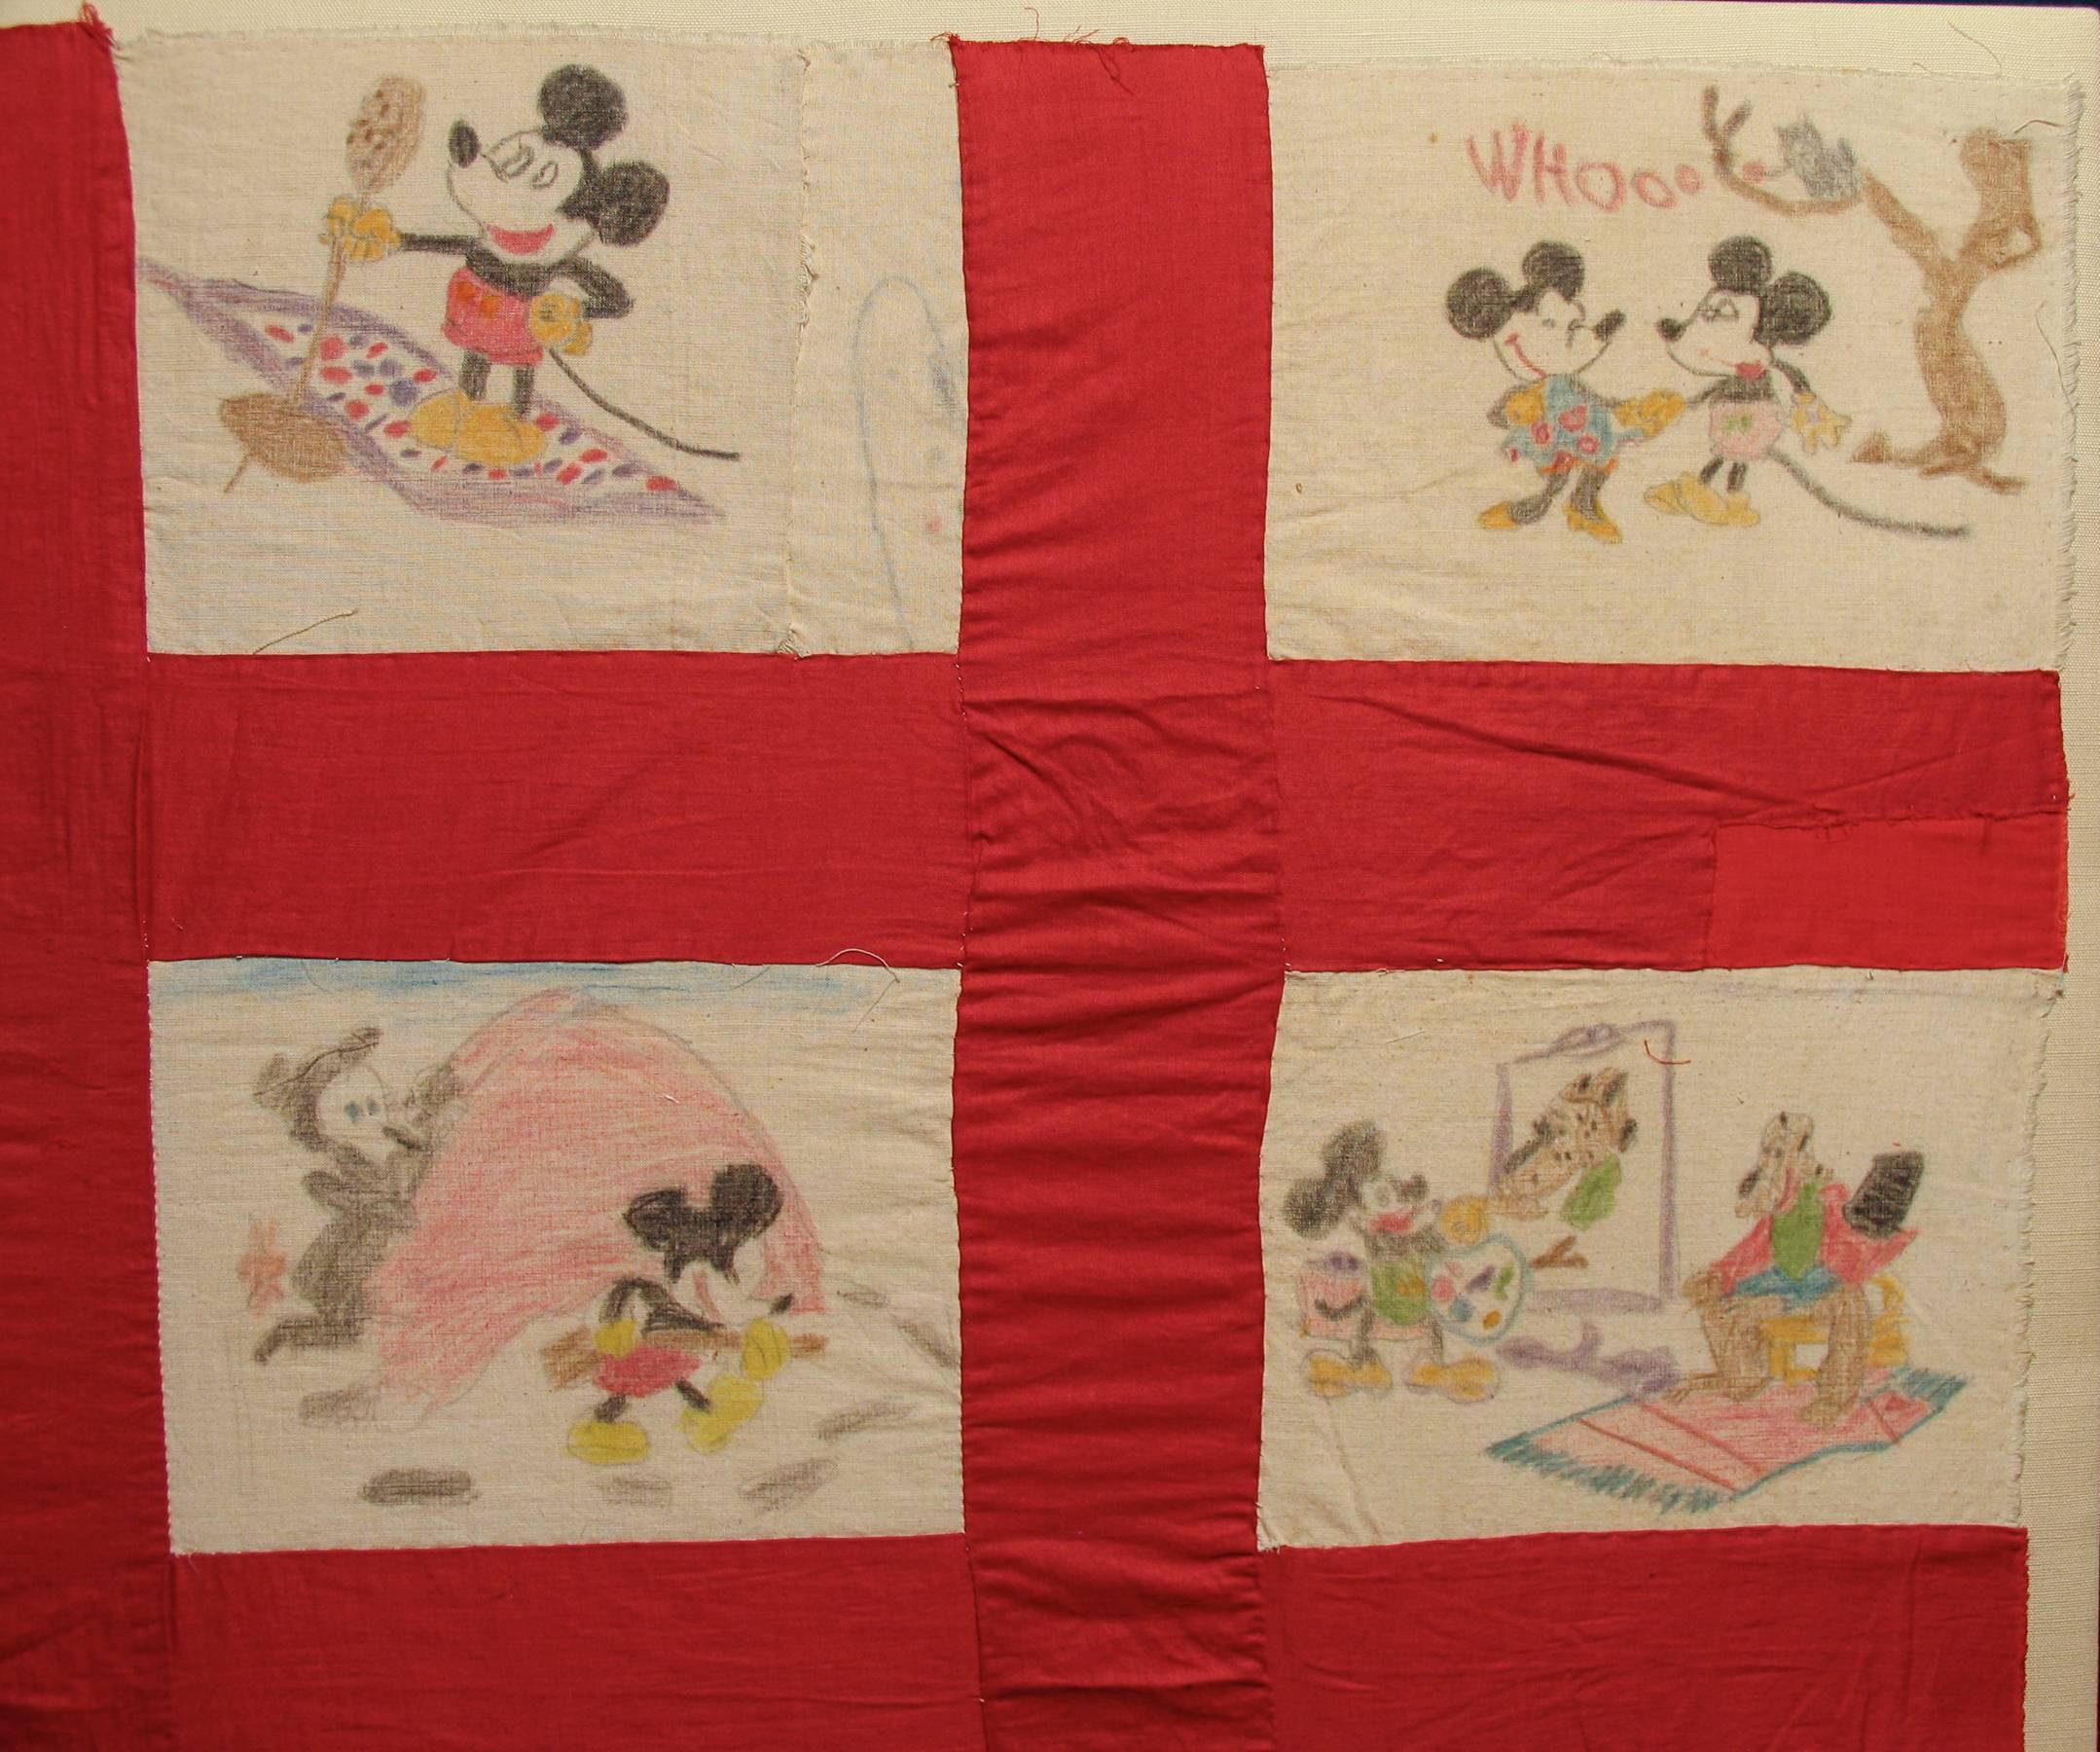 Mickey Mouse Quilt Cover

Region: American

Circa: 1st half 20th Century

Material: Twenty individual cotton cloth panels hand-stitched to a pieced grid of red cloth borders, professionally mounted 

Dimension: L. 45 1/2” x W 44” x